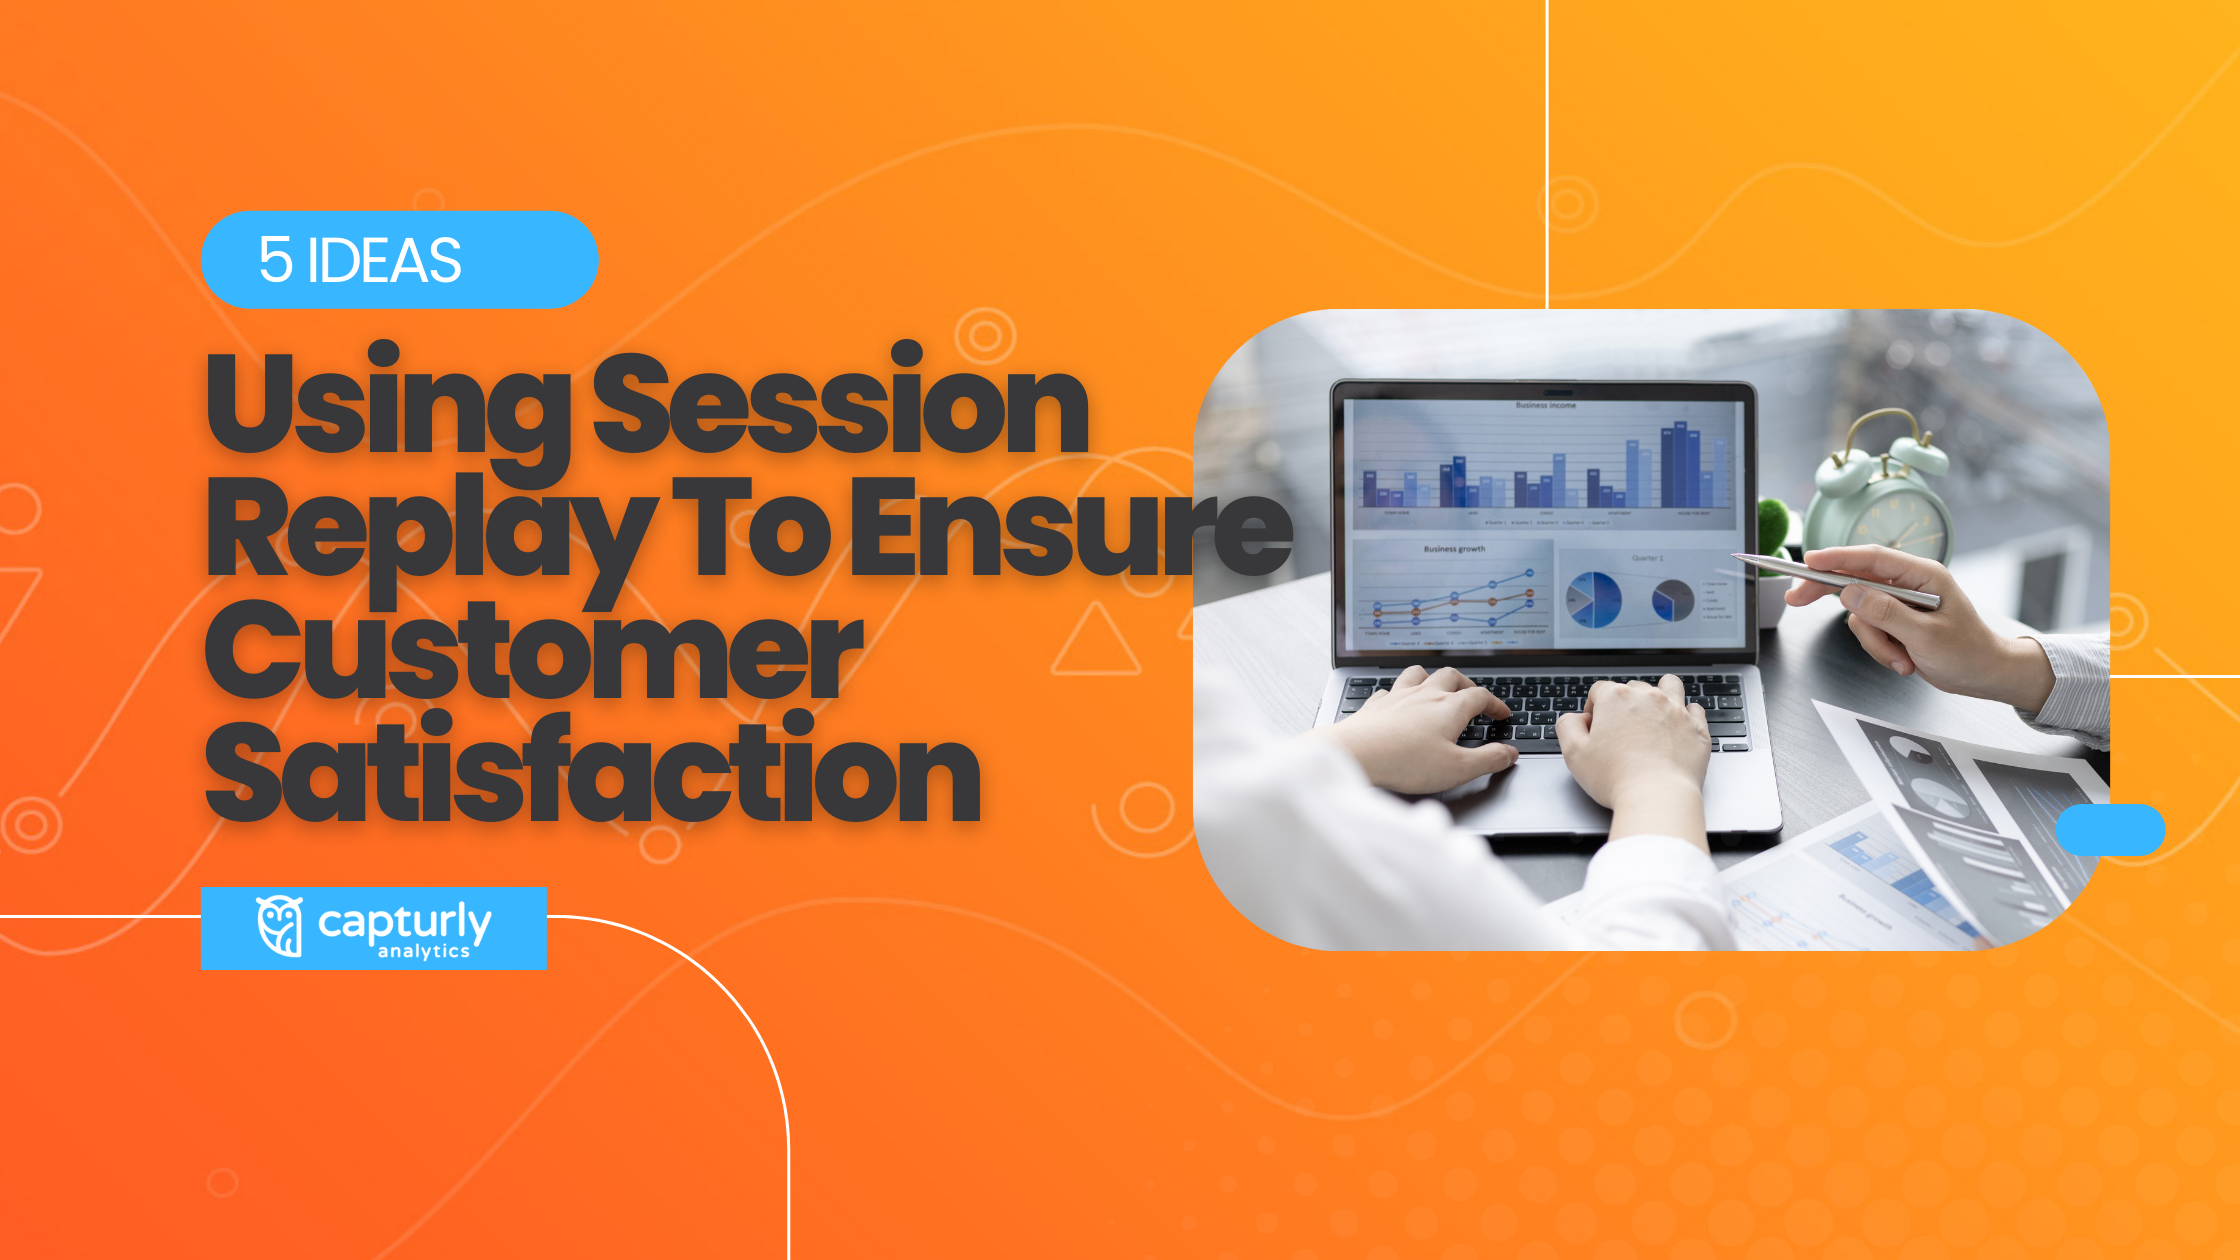 5 Ideas For Using Session Replay To Ensure Customer Satisfaction